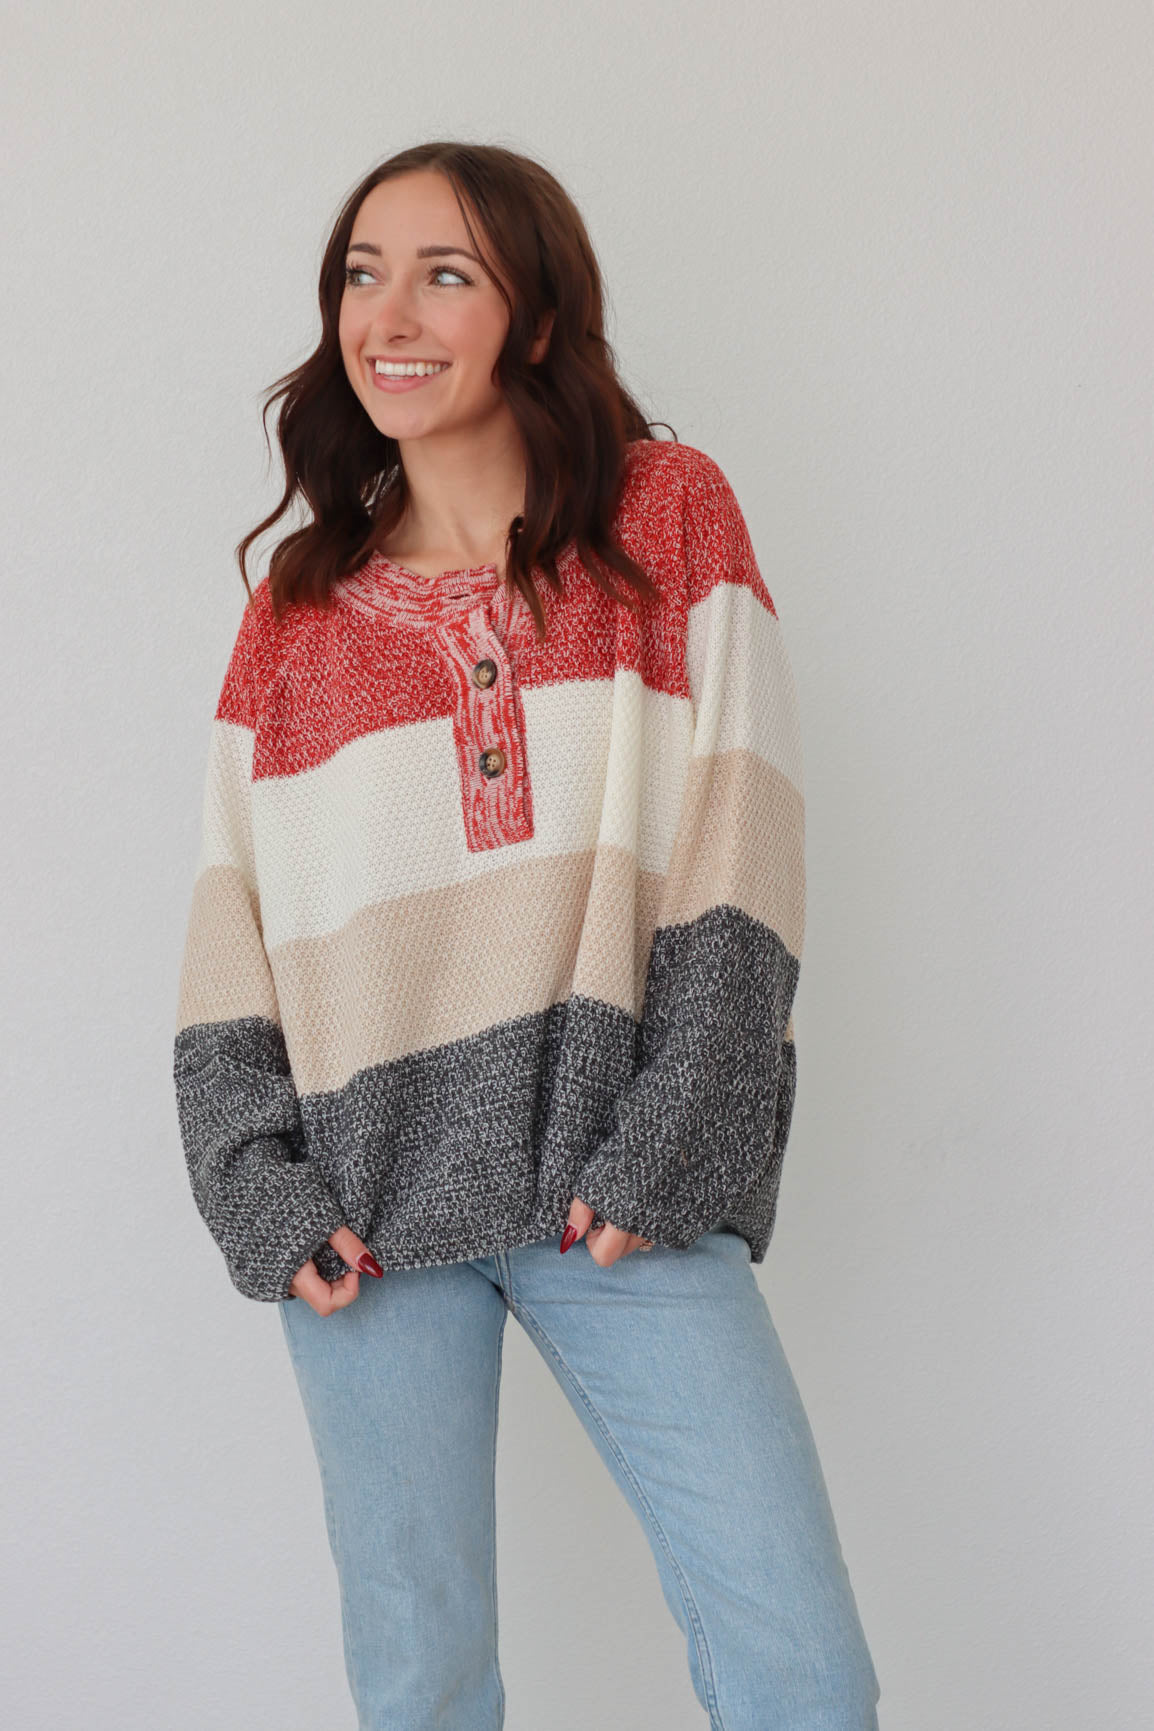 girl wearing red, cream, and gray knit long sleeved top